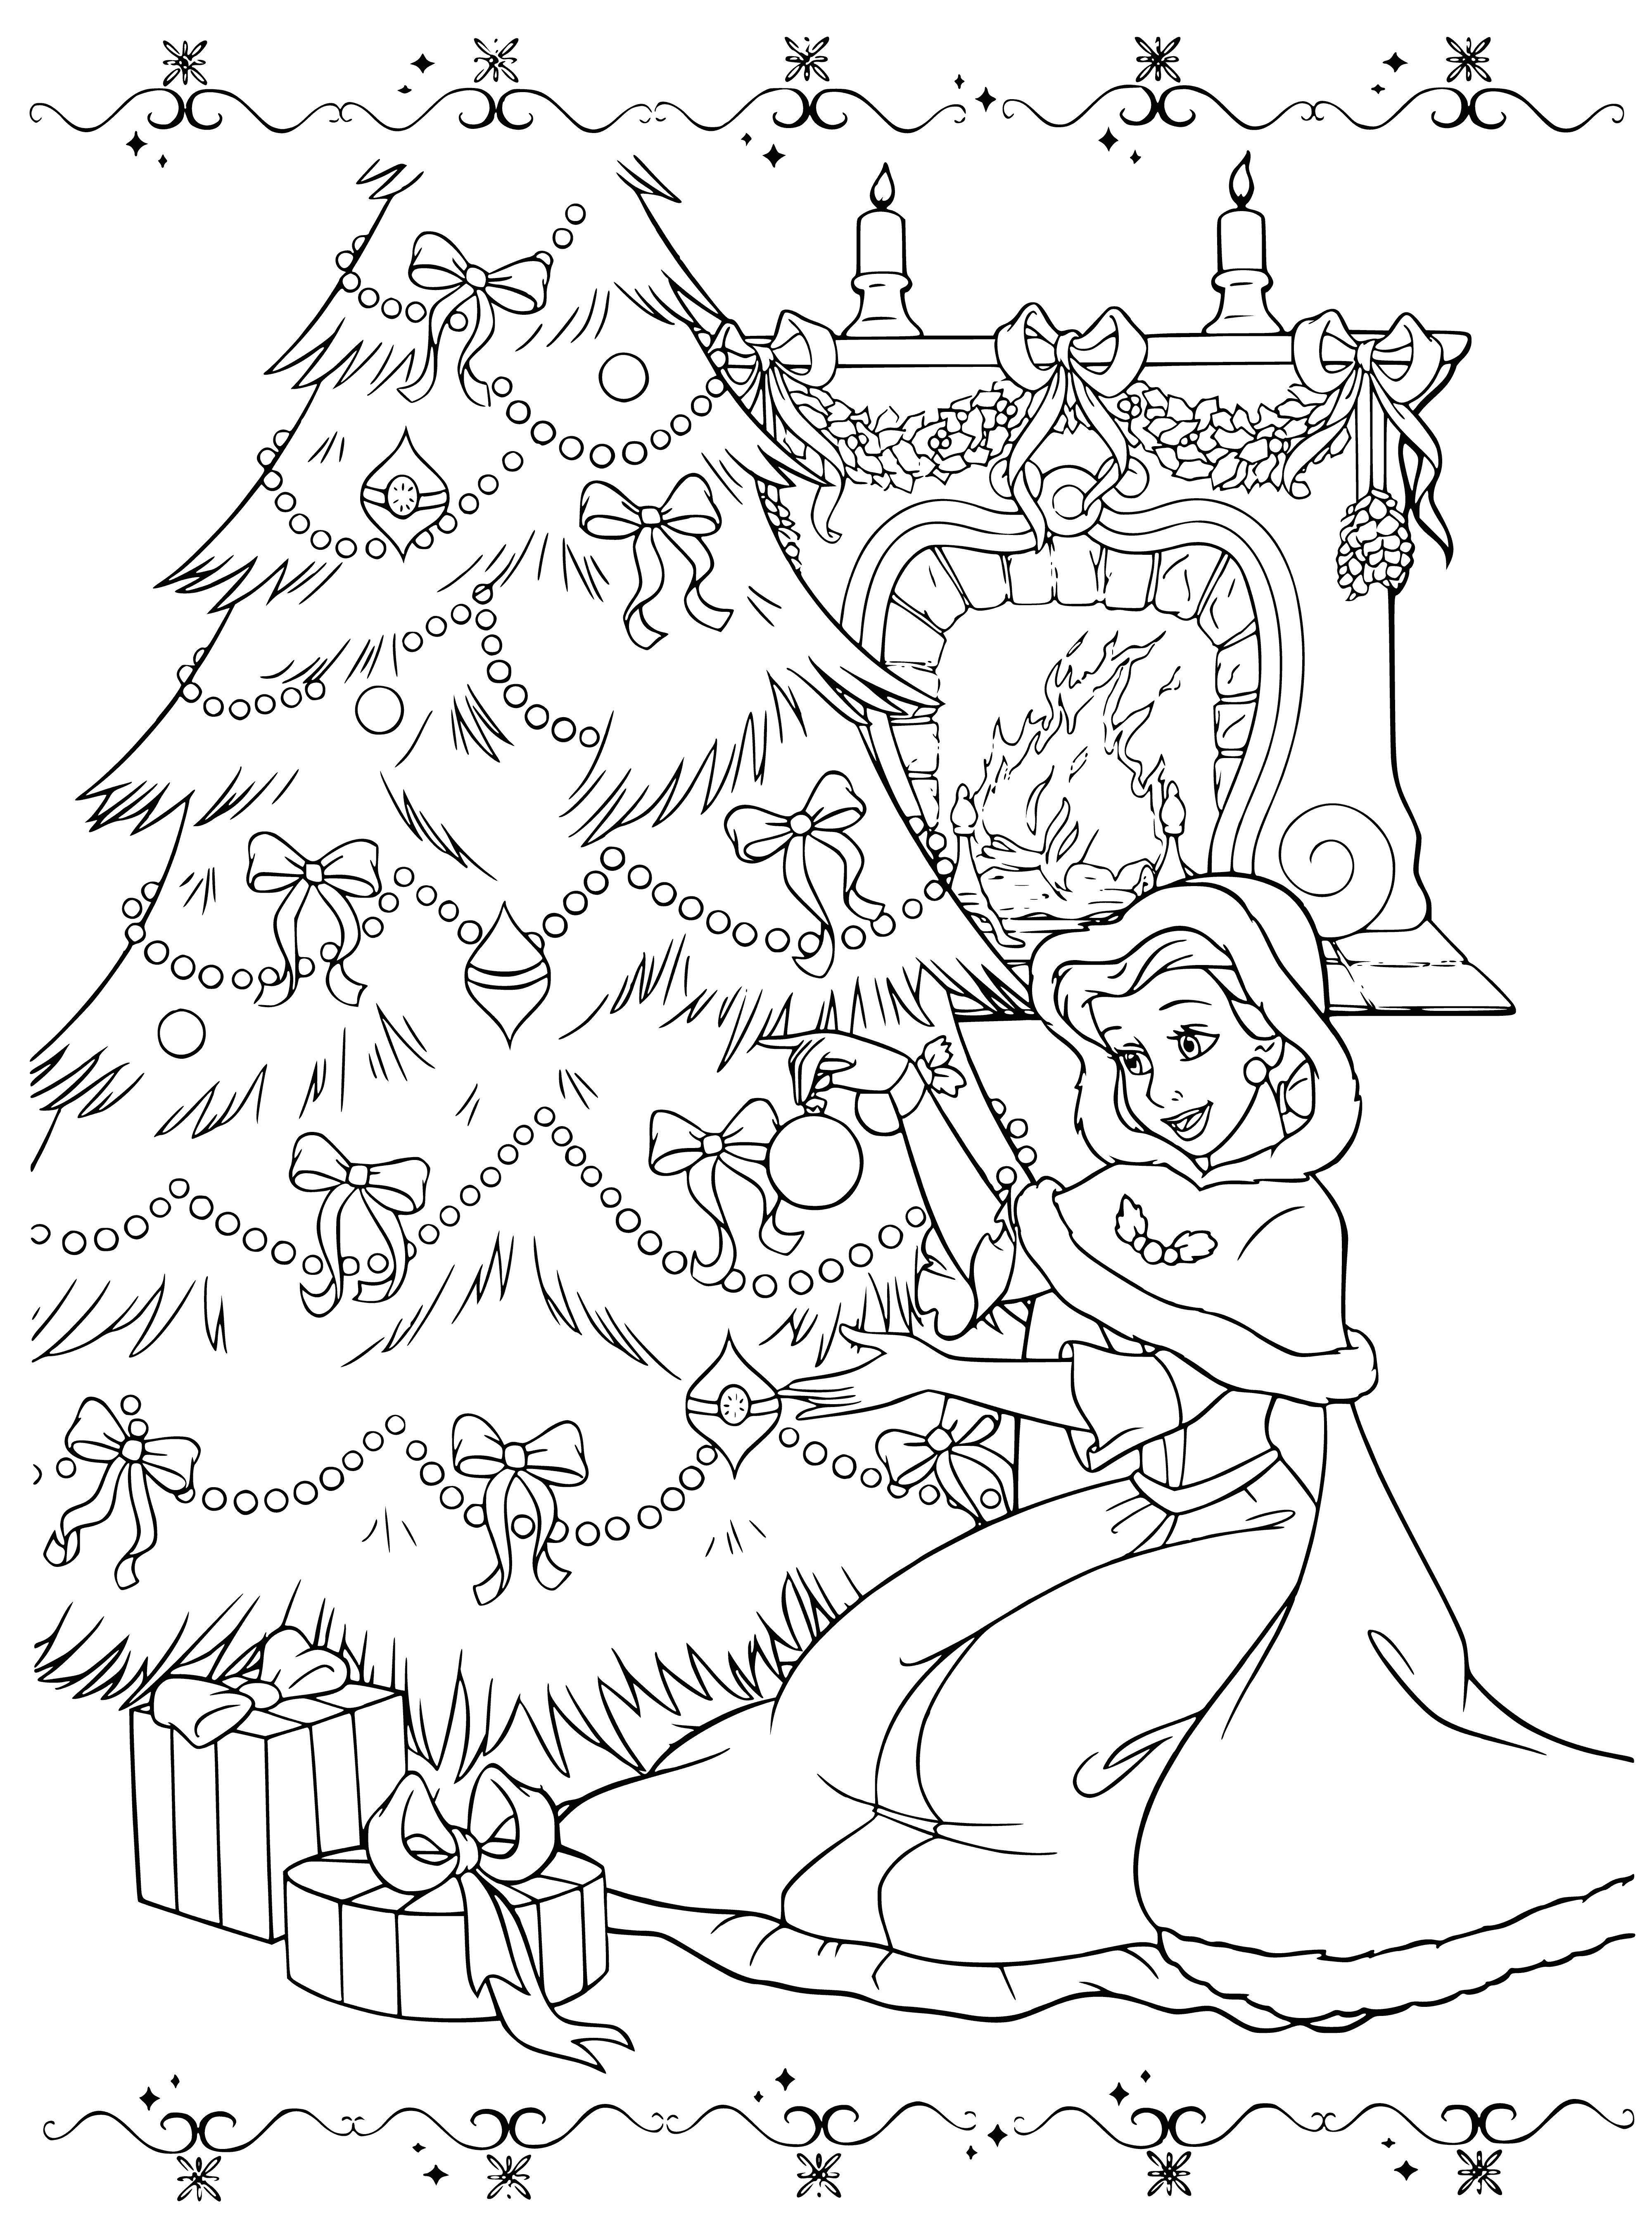 coloring page: Belle decorates the Christmas tree with a star, surrounded by presents and a fireplace in the background.